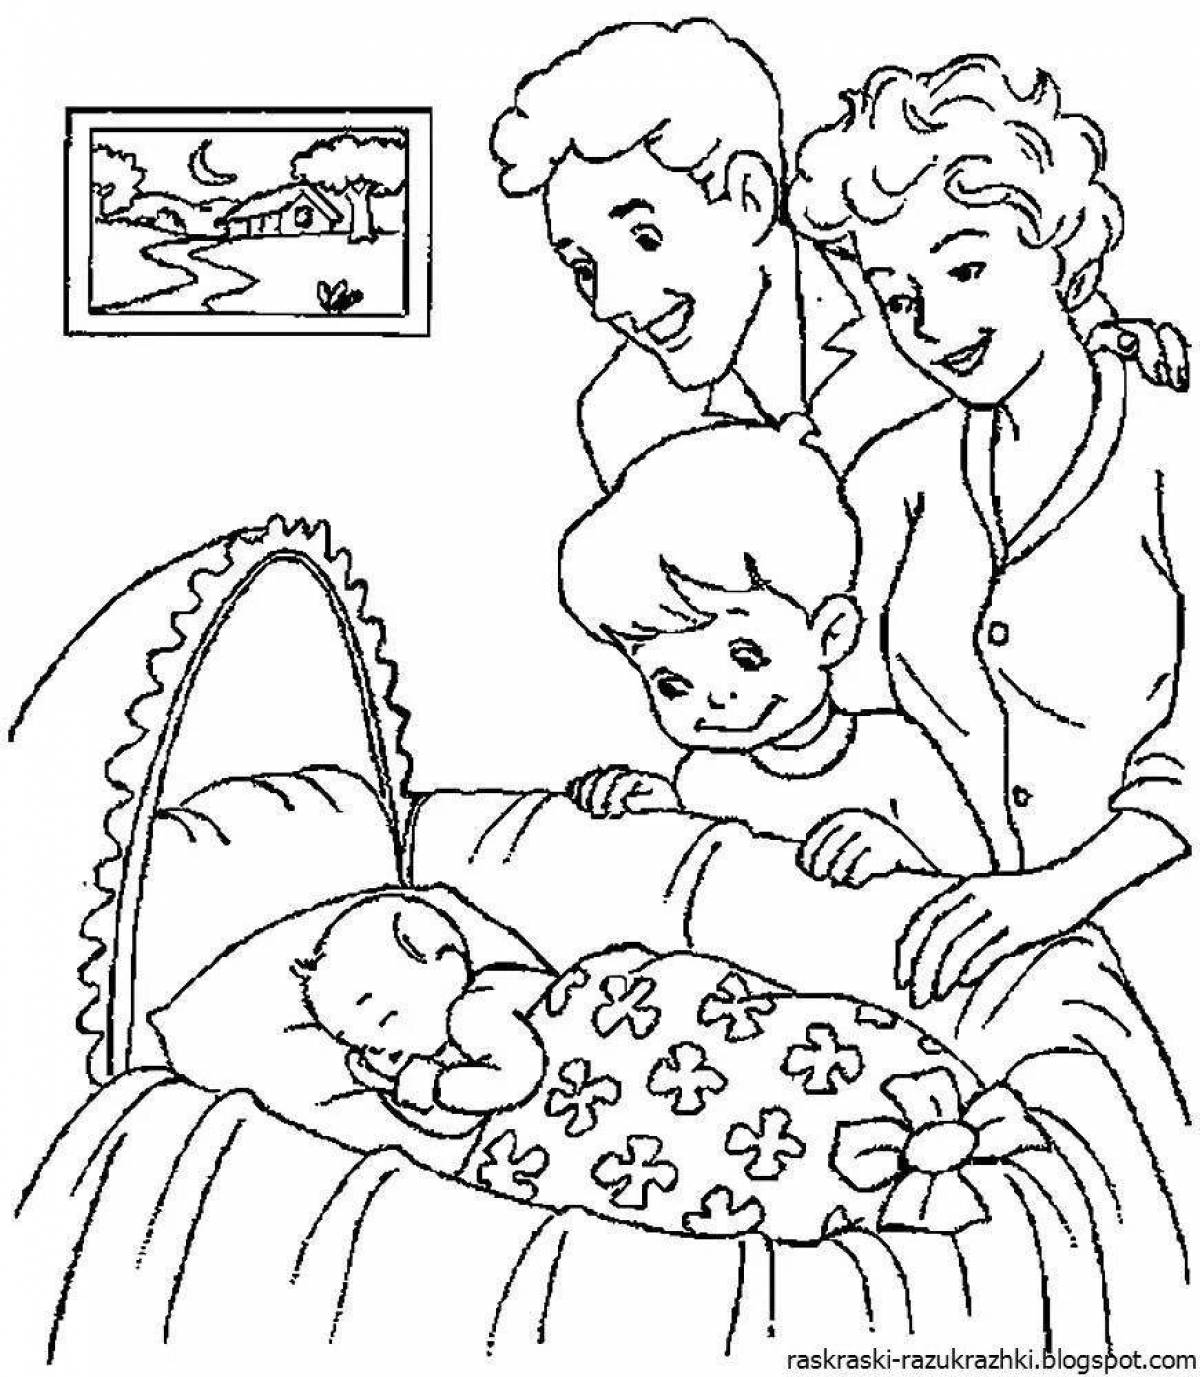 Caring mom and dad coloring book for kids